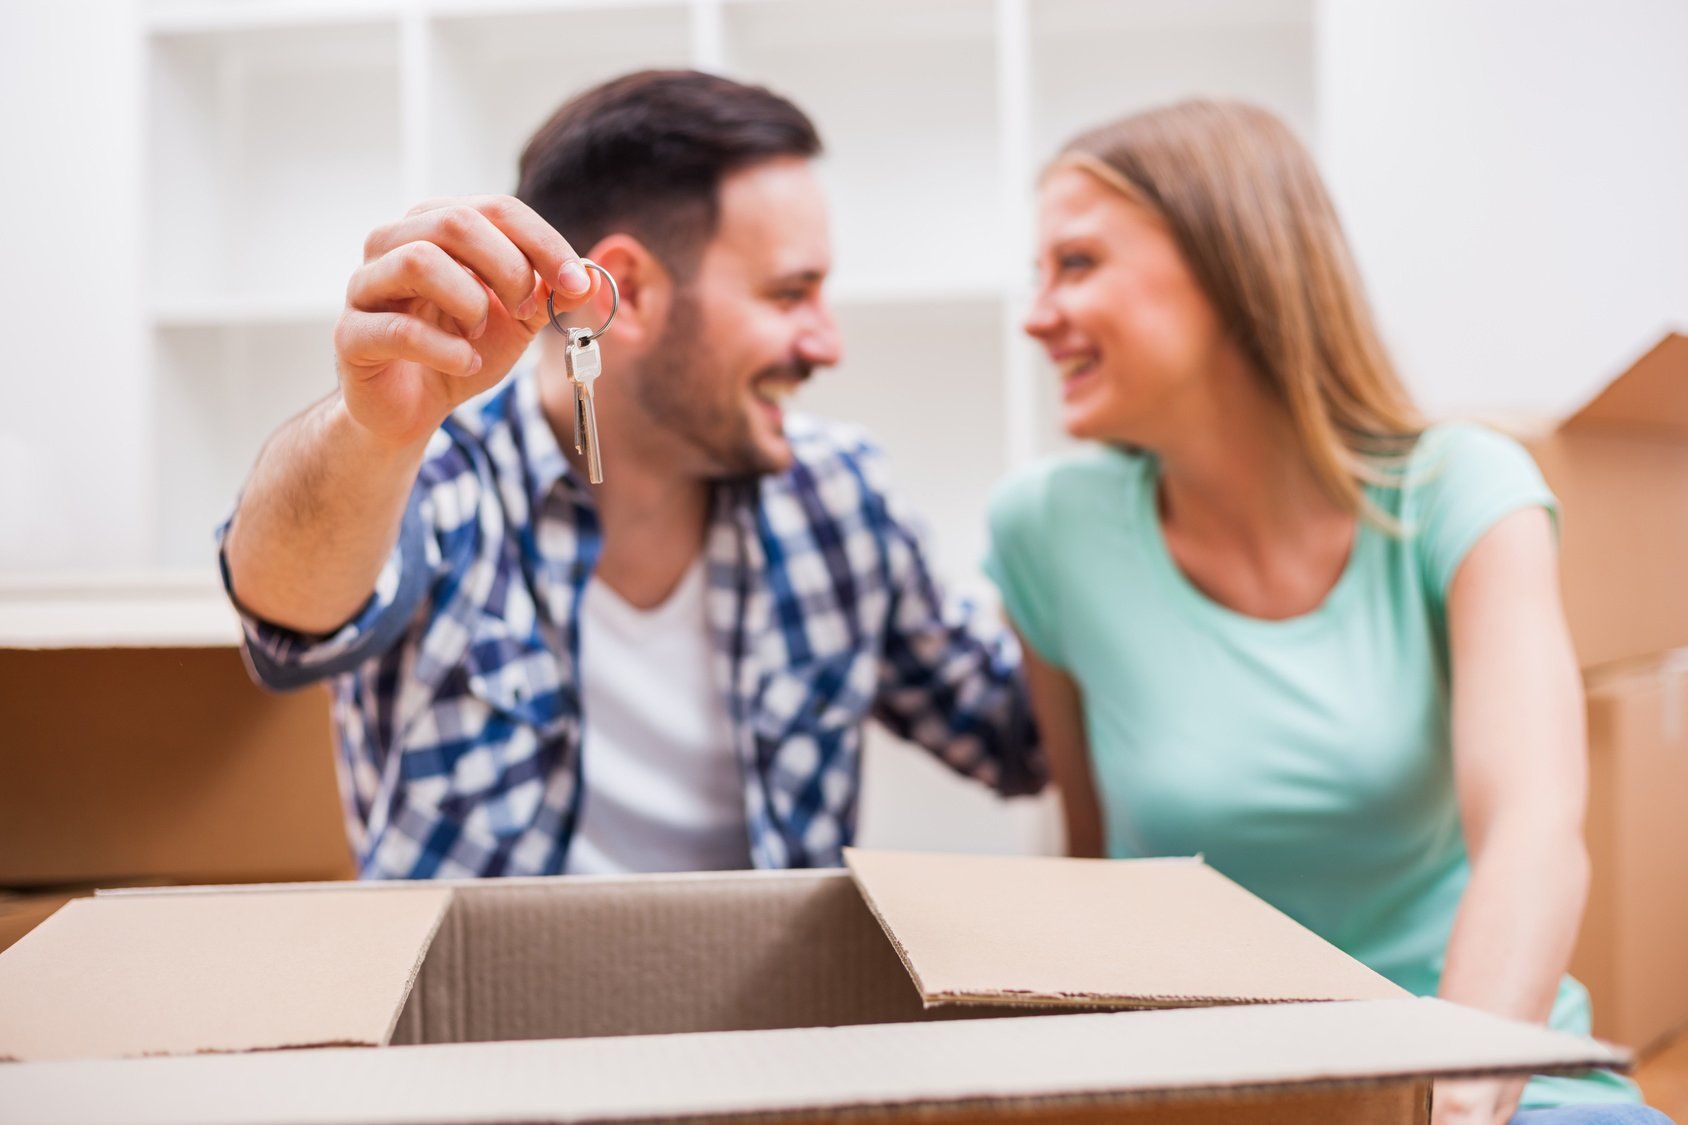 A man and a woman are sitting in a cardboard box holding keys.